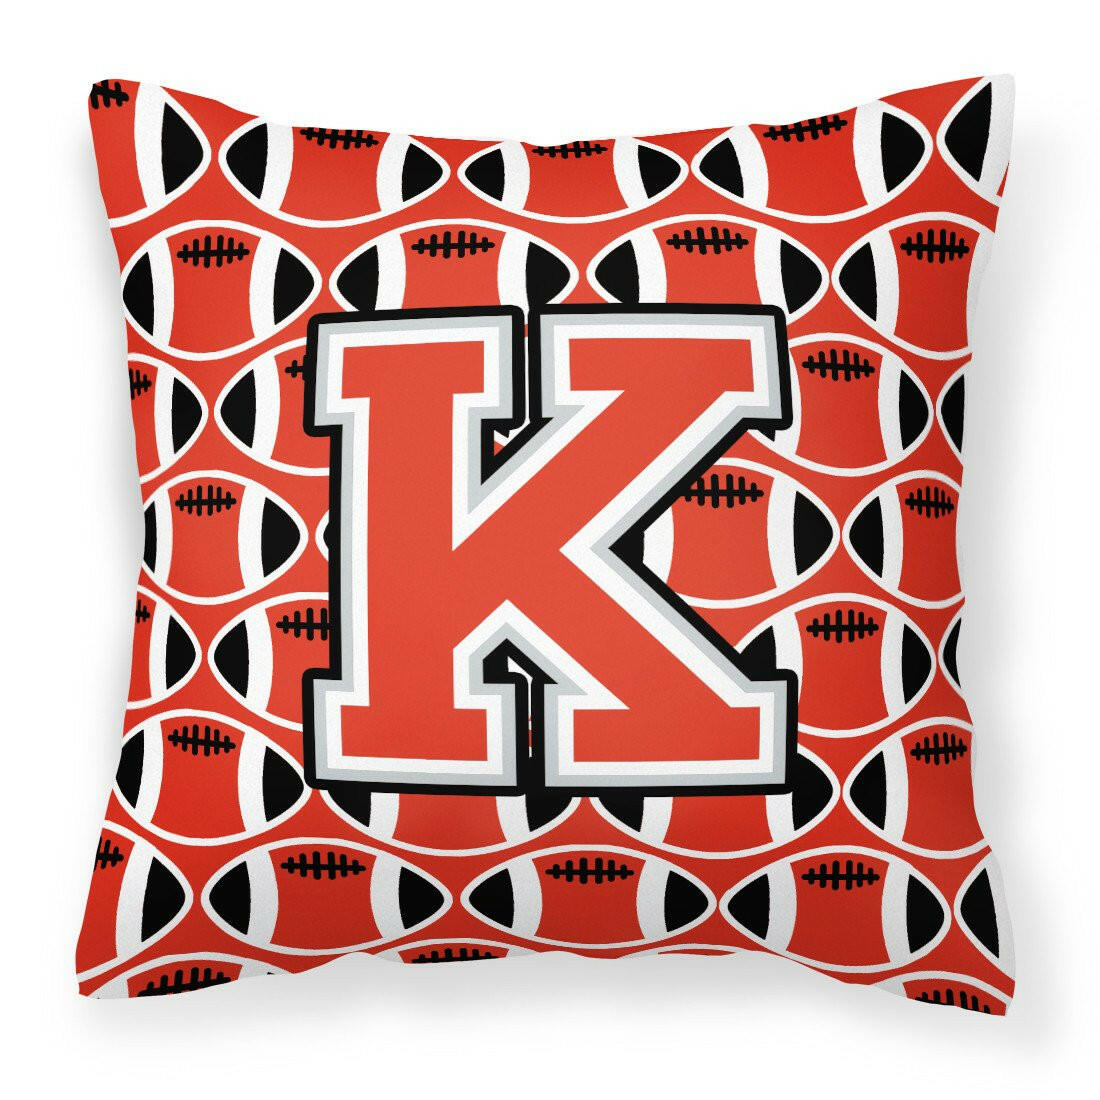 Letter K Football Scarlet and Grey Fabric Decorative Pillow CJ1067-KPW1414 by Caroline's Treasures